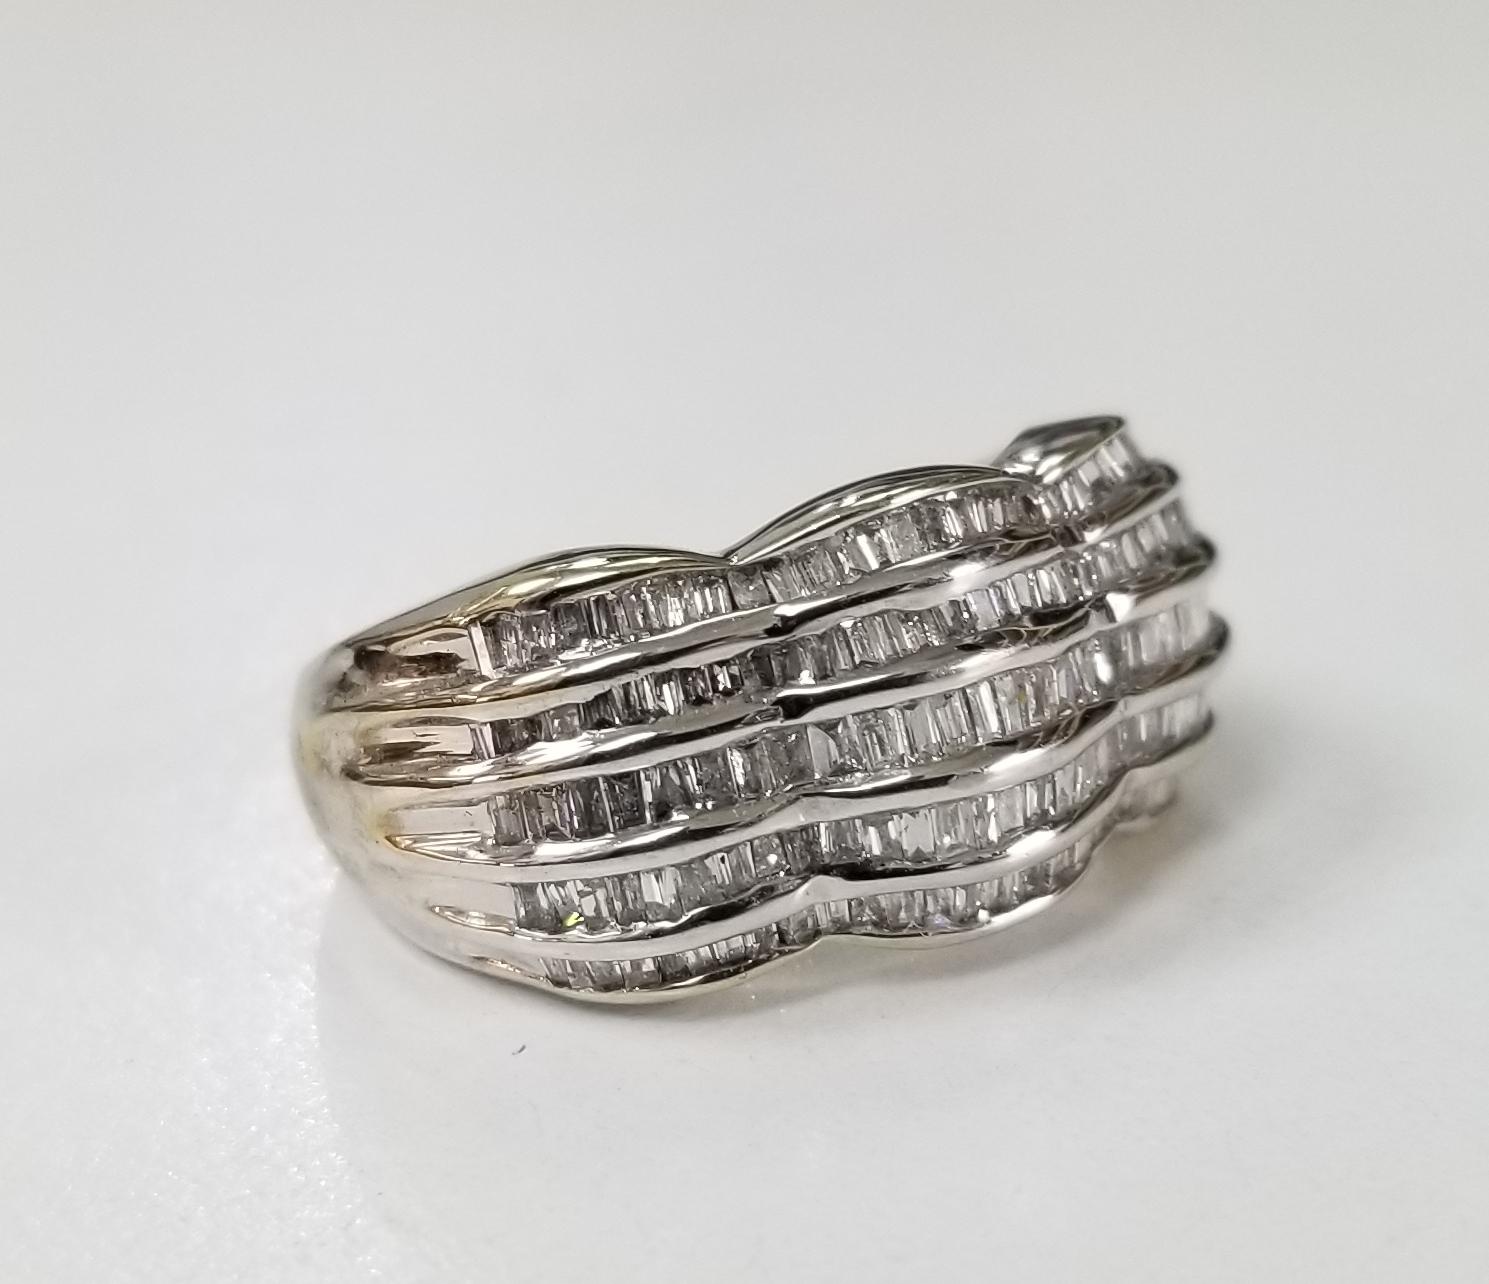 14 karat white gold 5 row diamond baguette channel set ring, containing 140 baguette cut diamonds of very fine quality weighing 1.80cts.  This ring is a size 8 but we will size to fit for free.